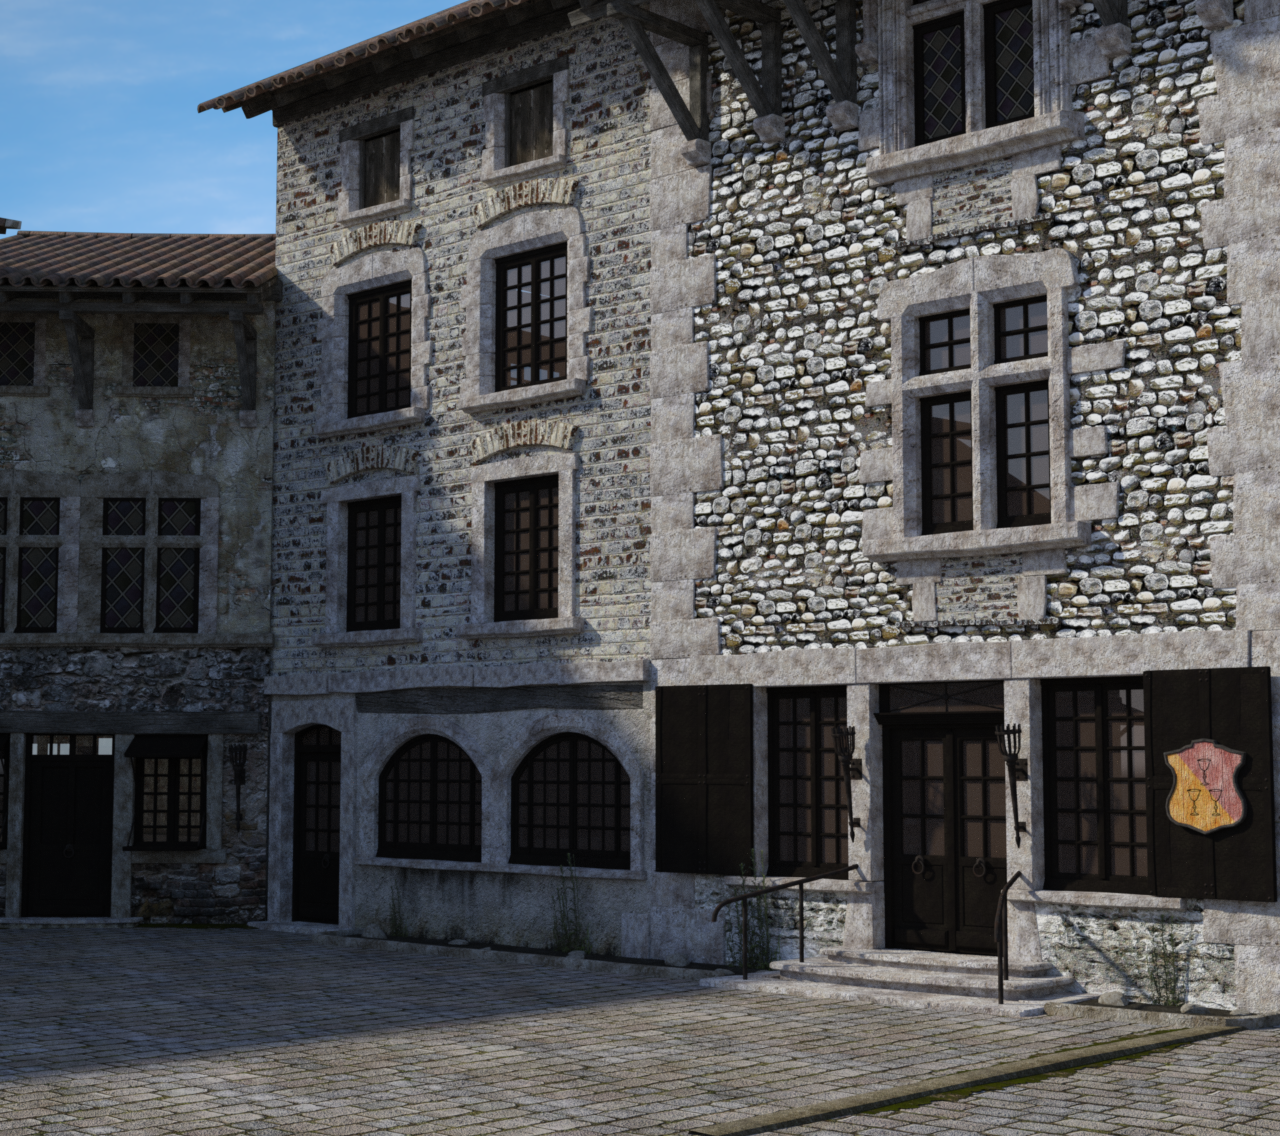 EXT. MEDIEVAL VILLAGE 3 – DAY